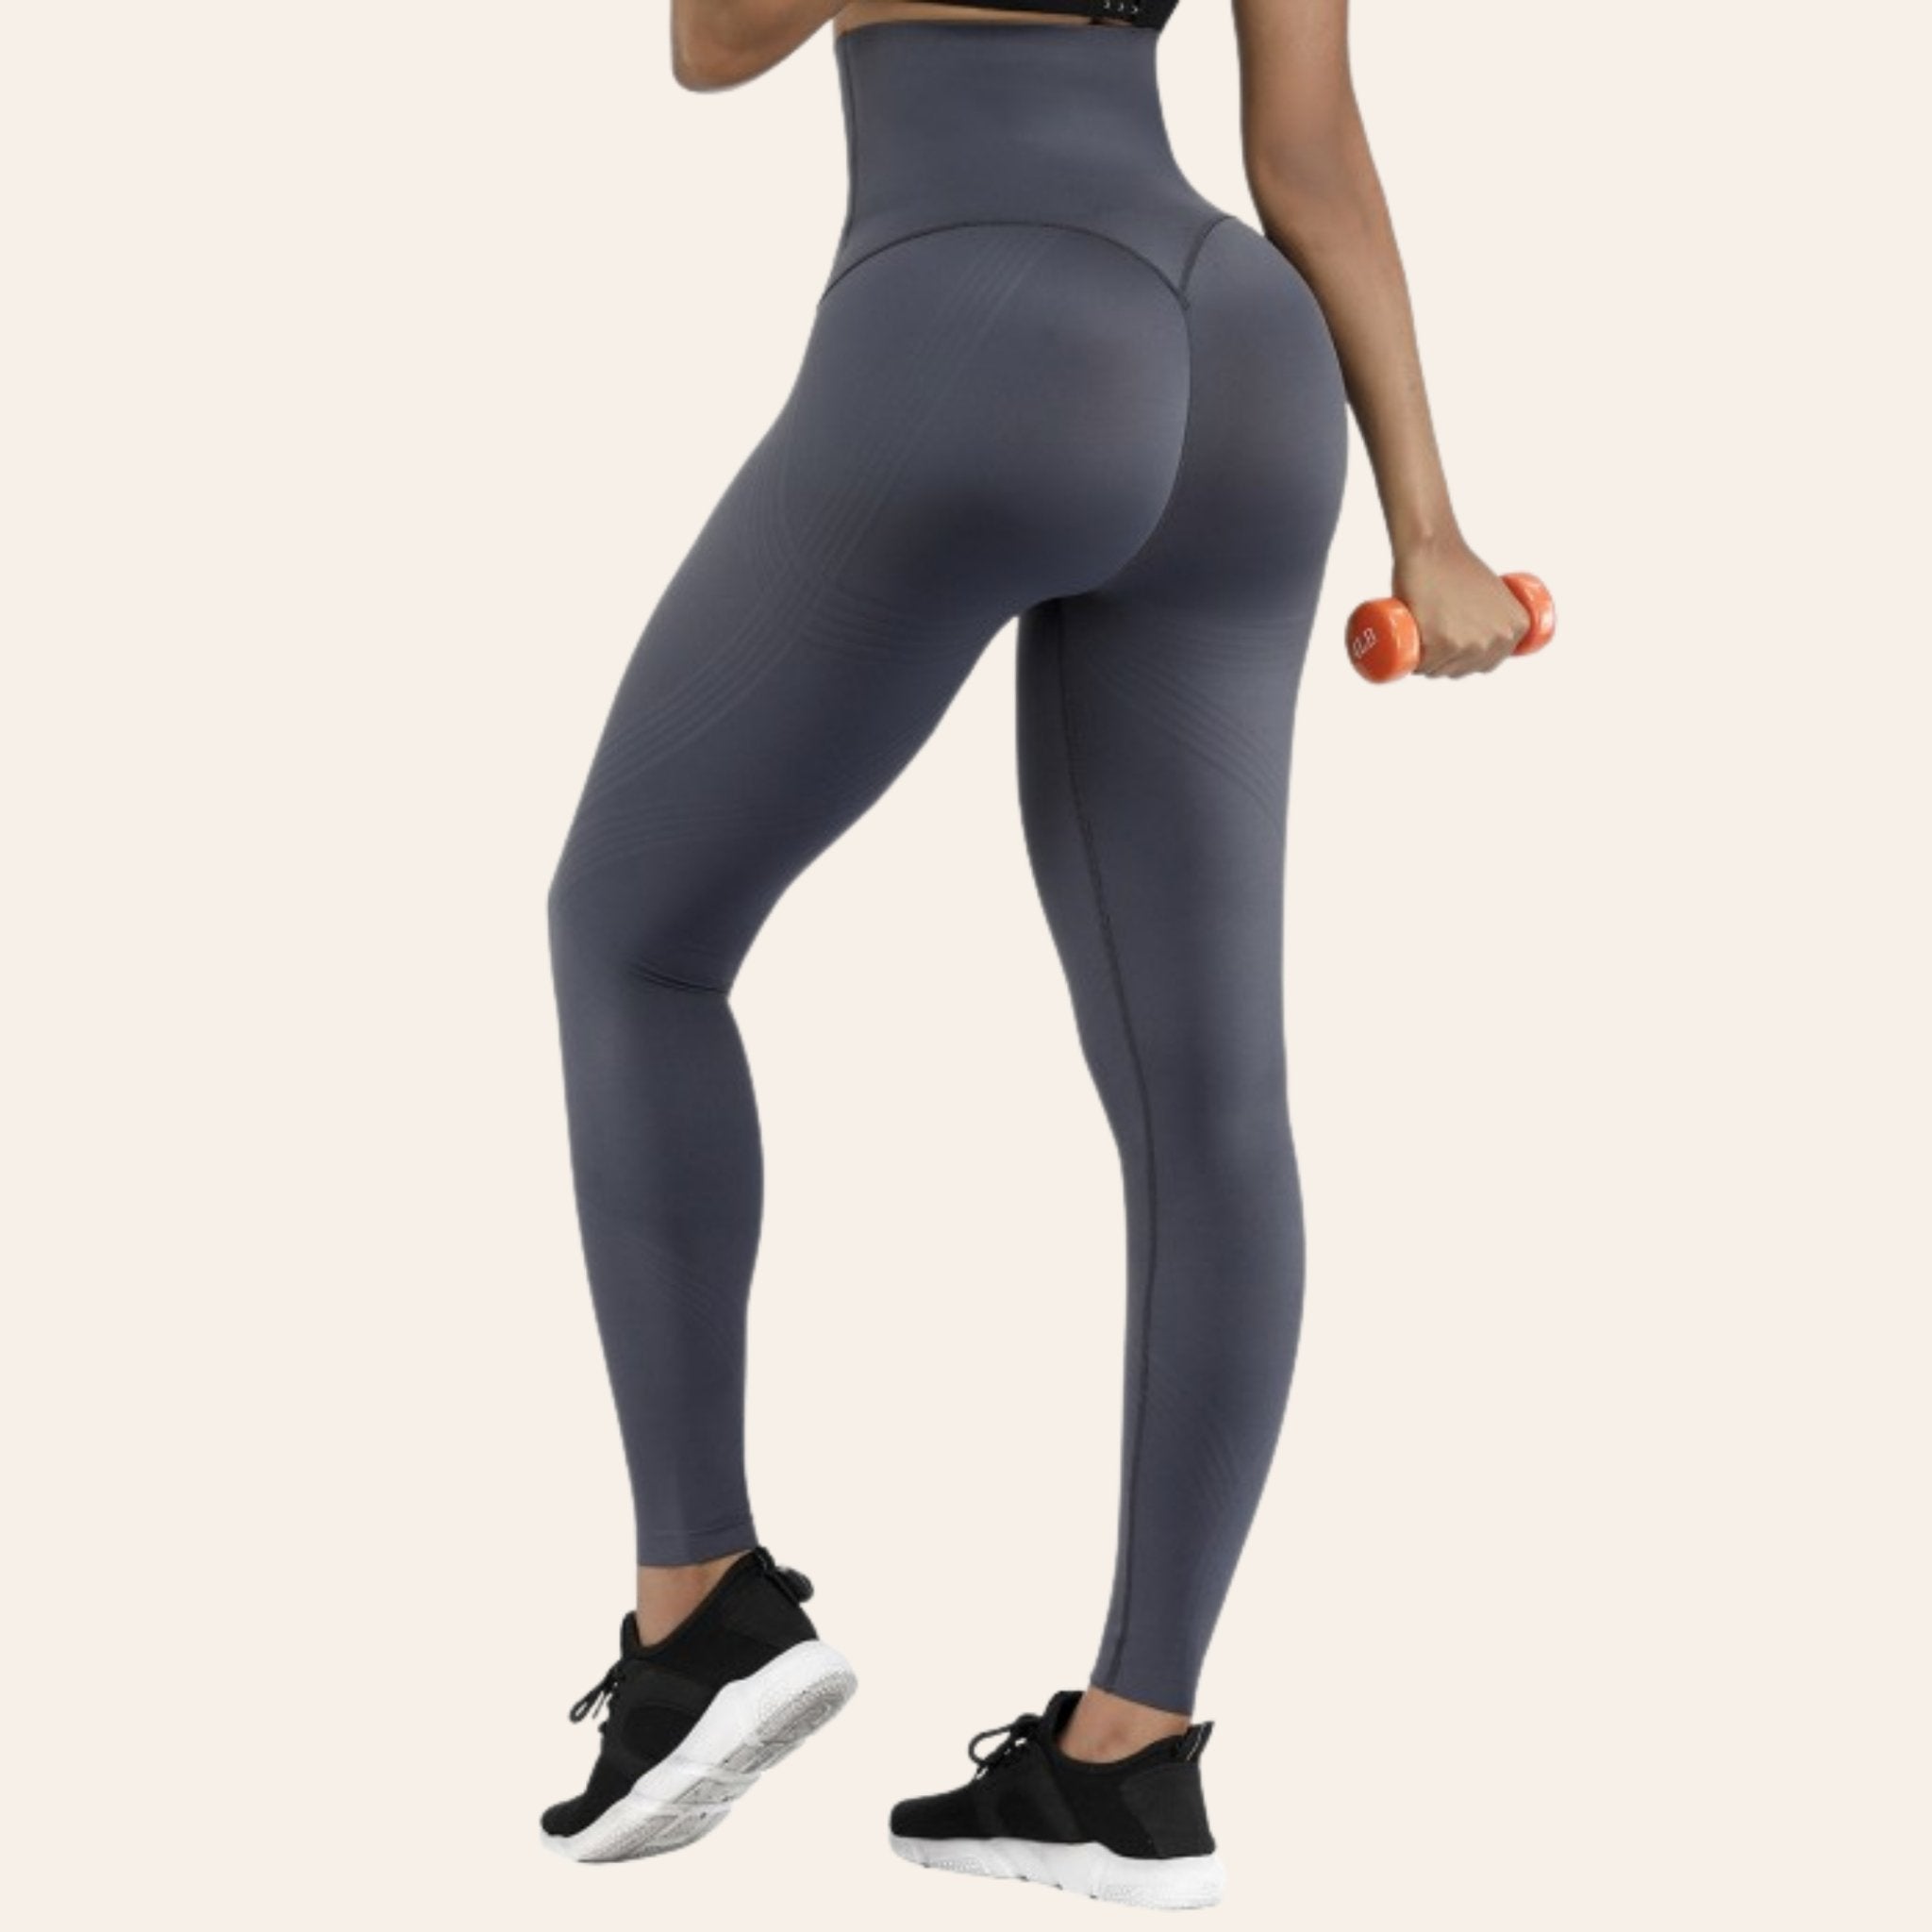 Btoperform Guardian Full Graphic Compression Leggings FY-132